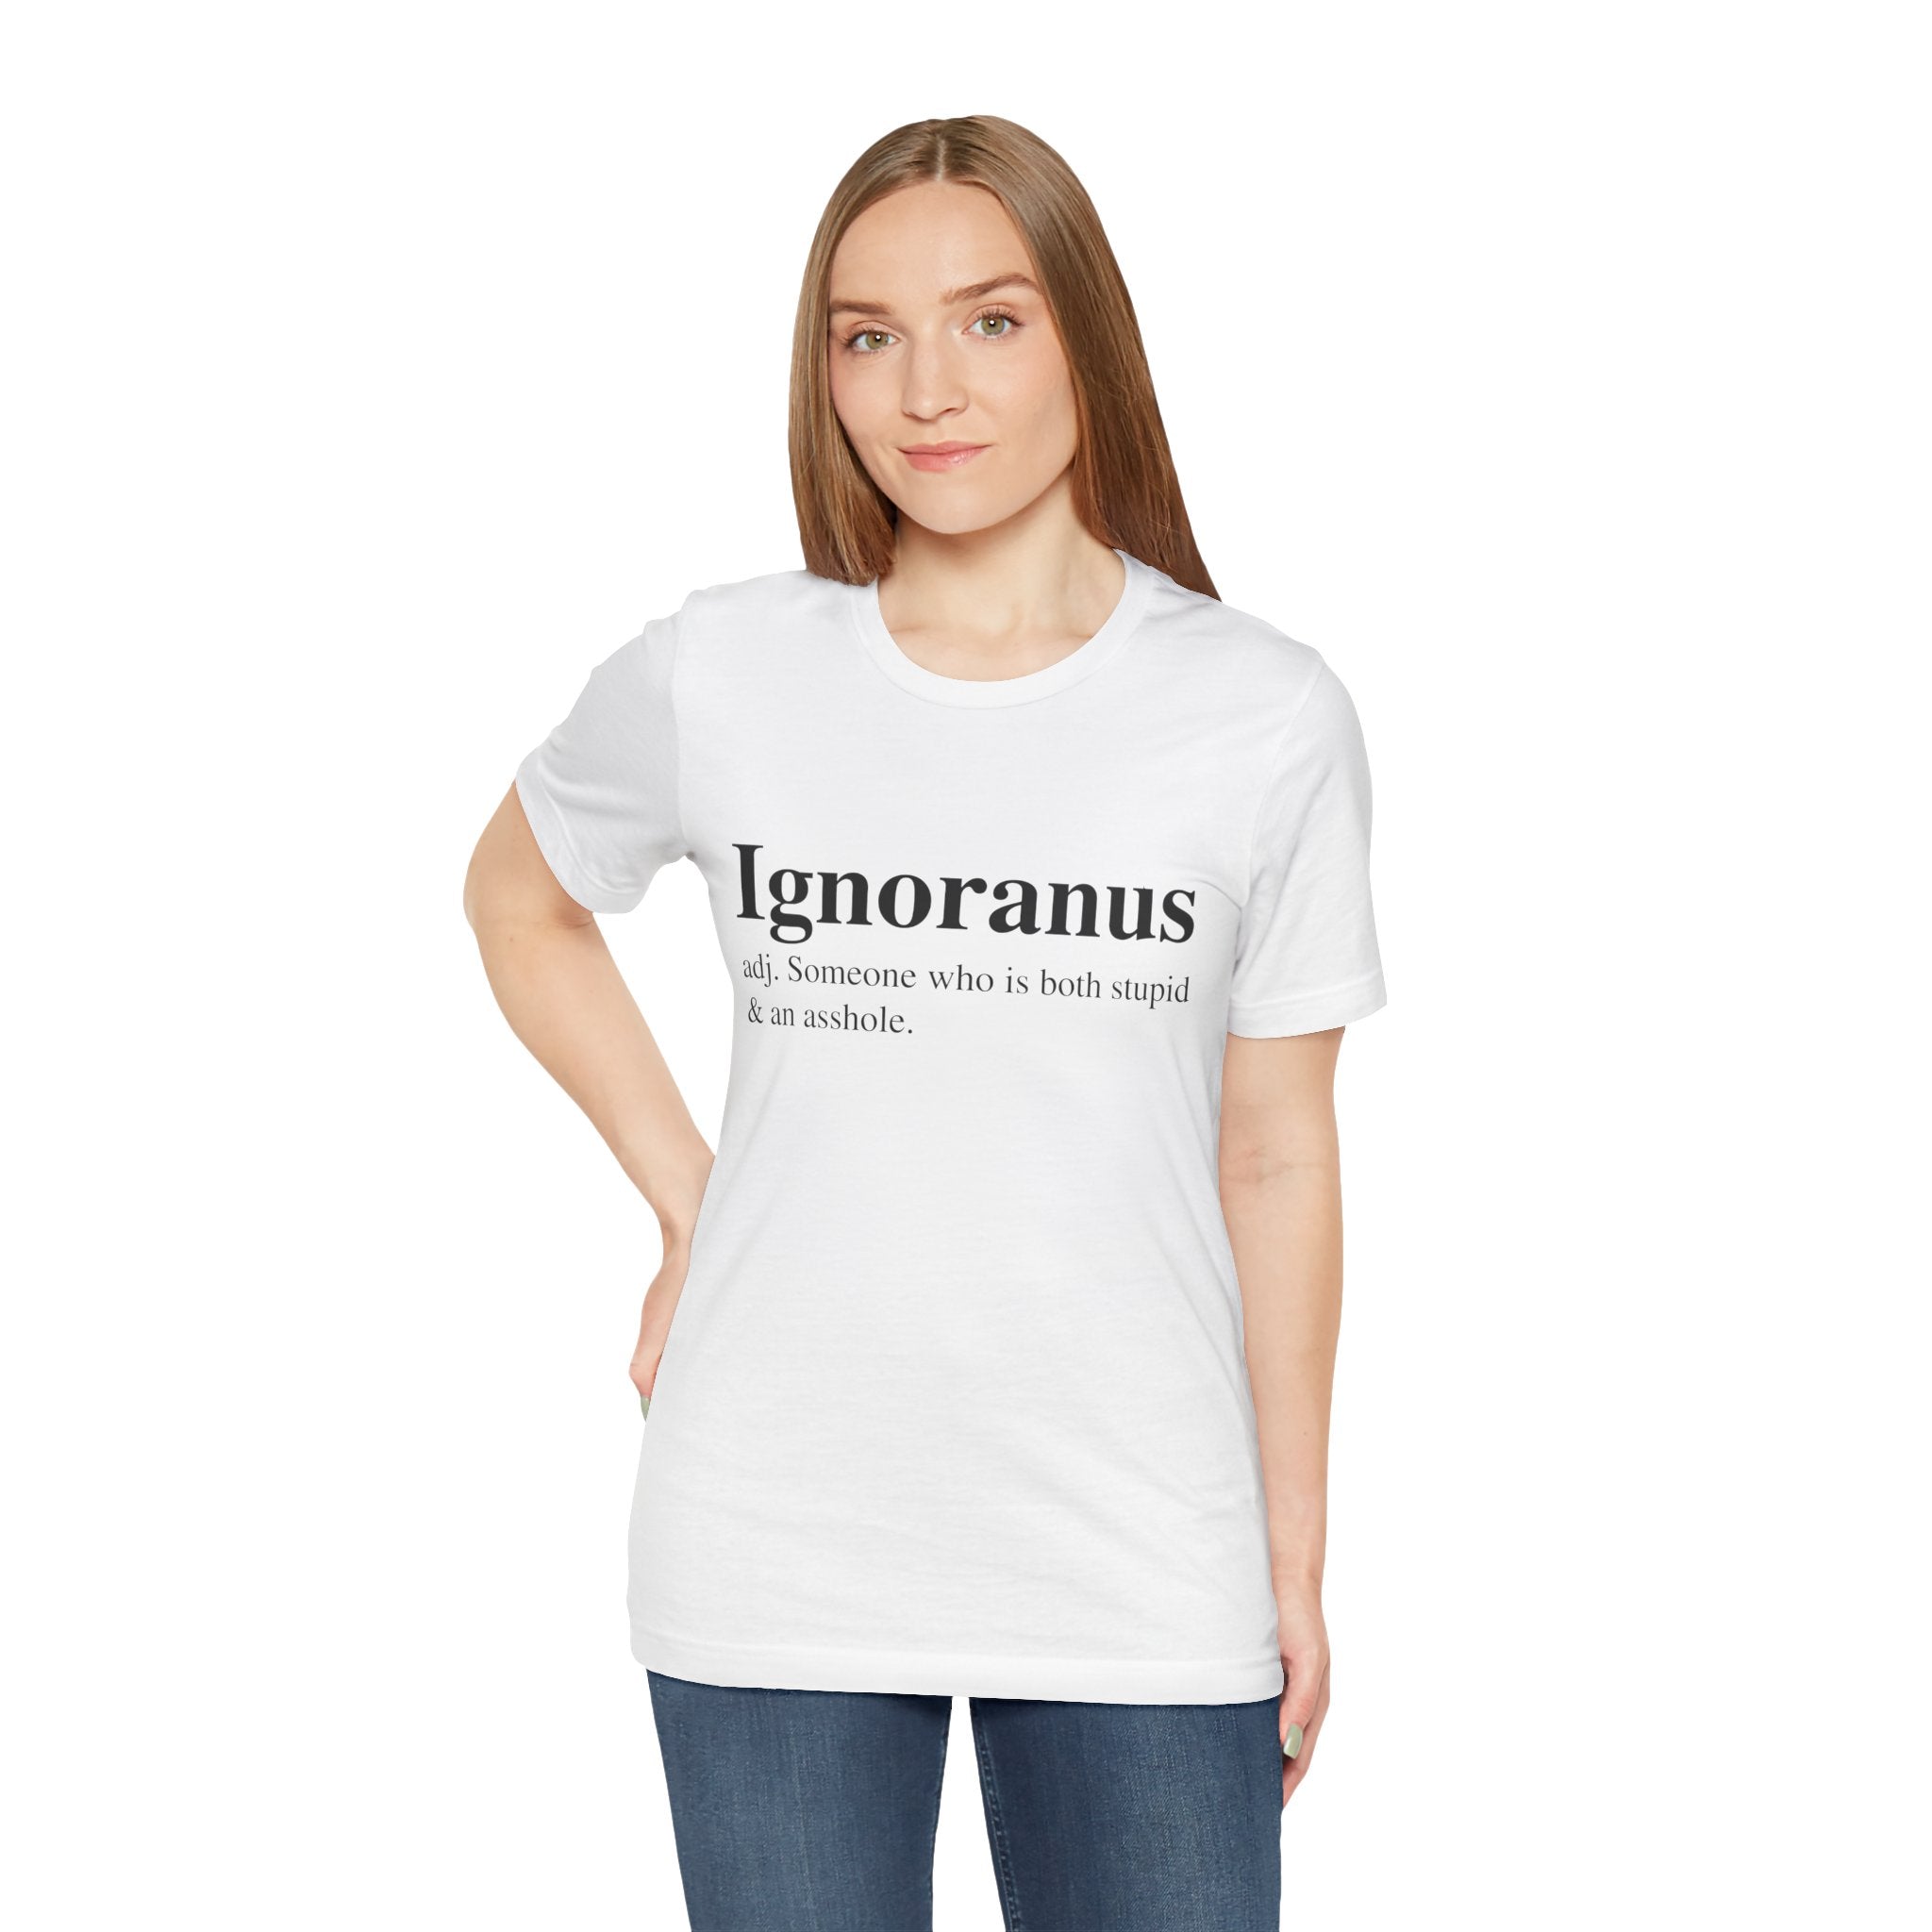 Sentence with product name: A woman in a soft cotton, white Ignoranus T-Shirt with its humorous definition printed on it, standing against a plain background.